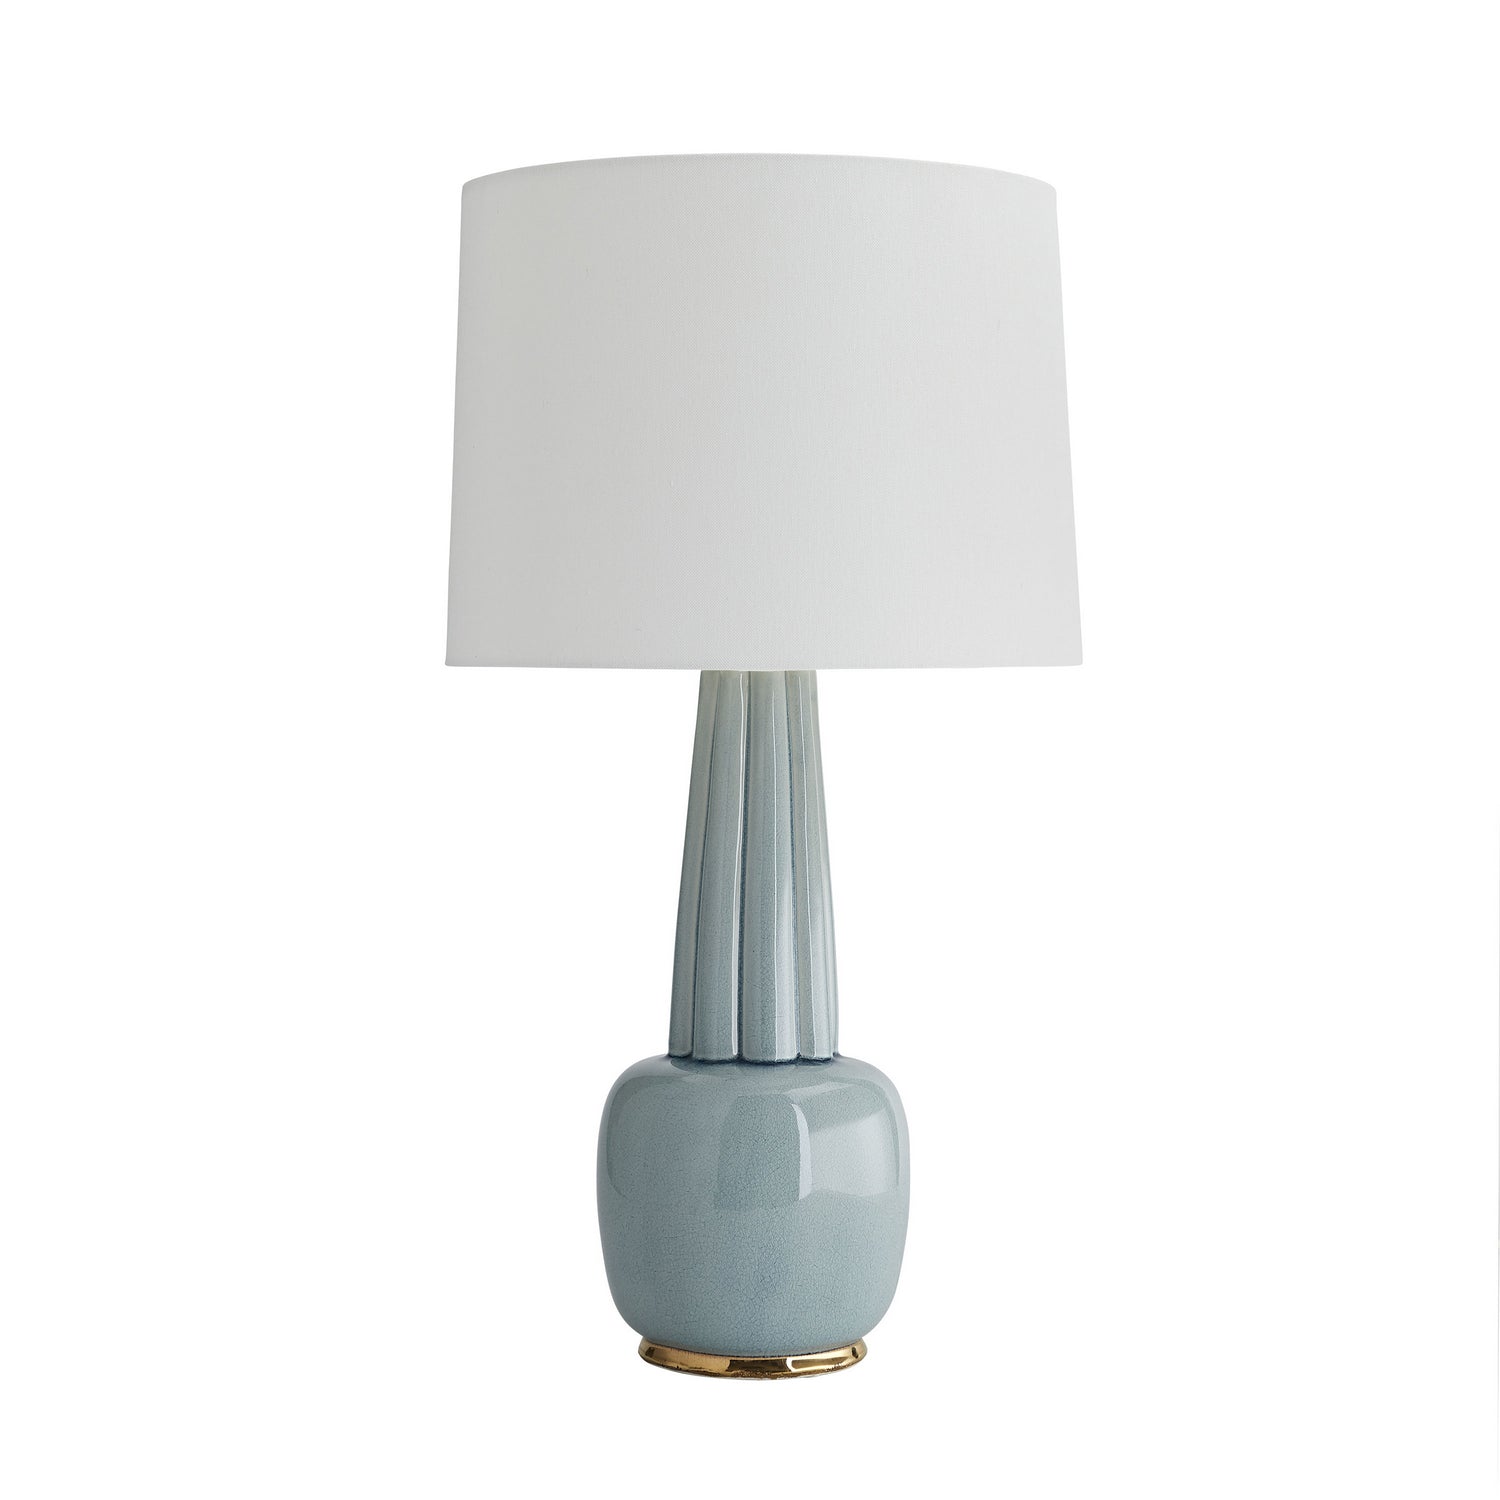 One Light Table Lamp from the Arlington collection in Celadon finish